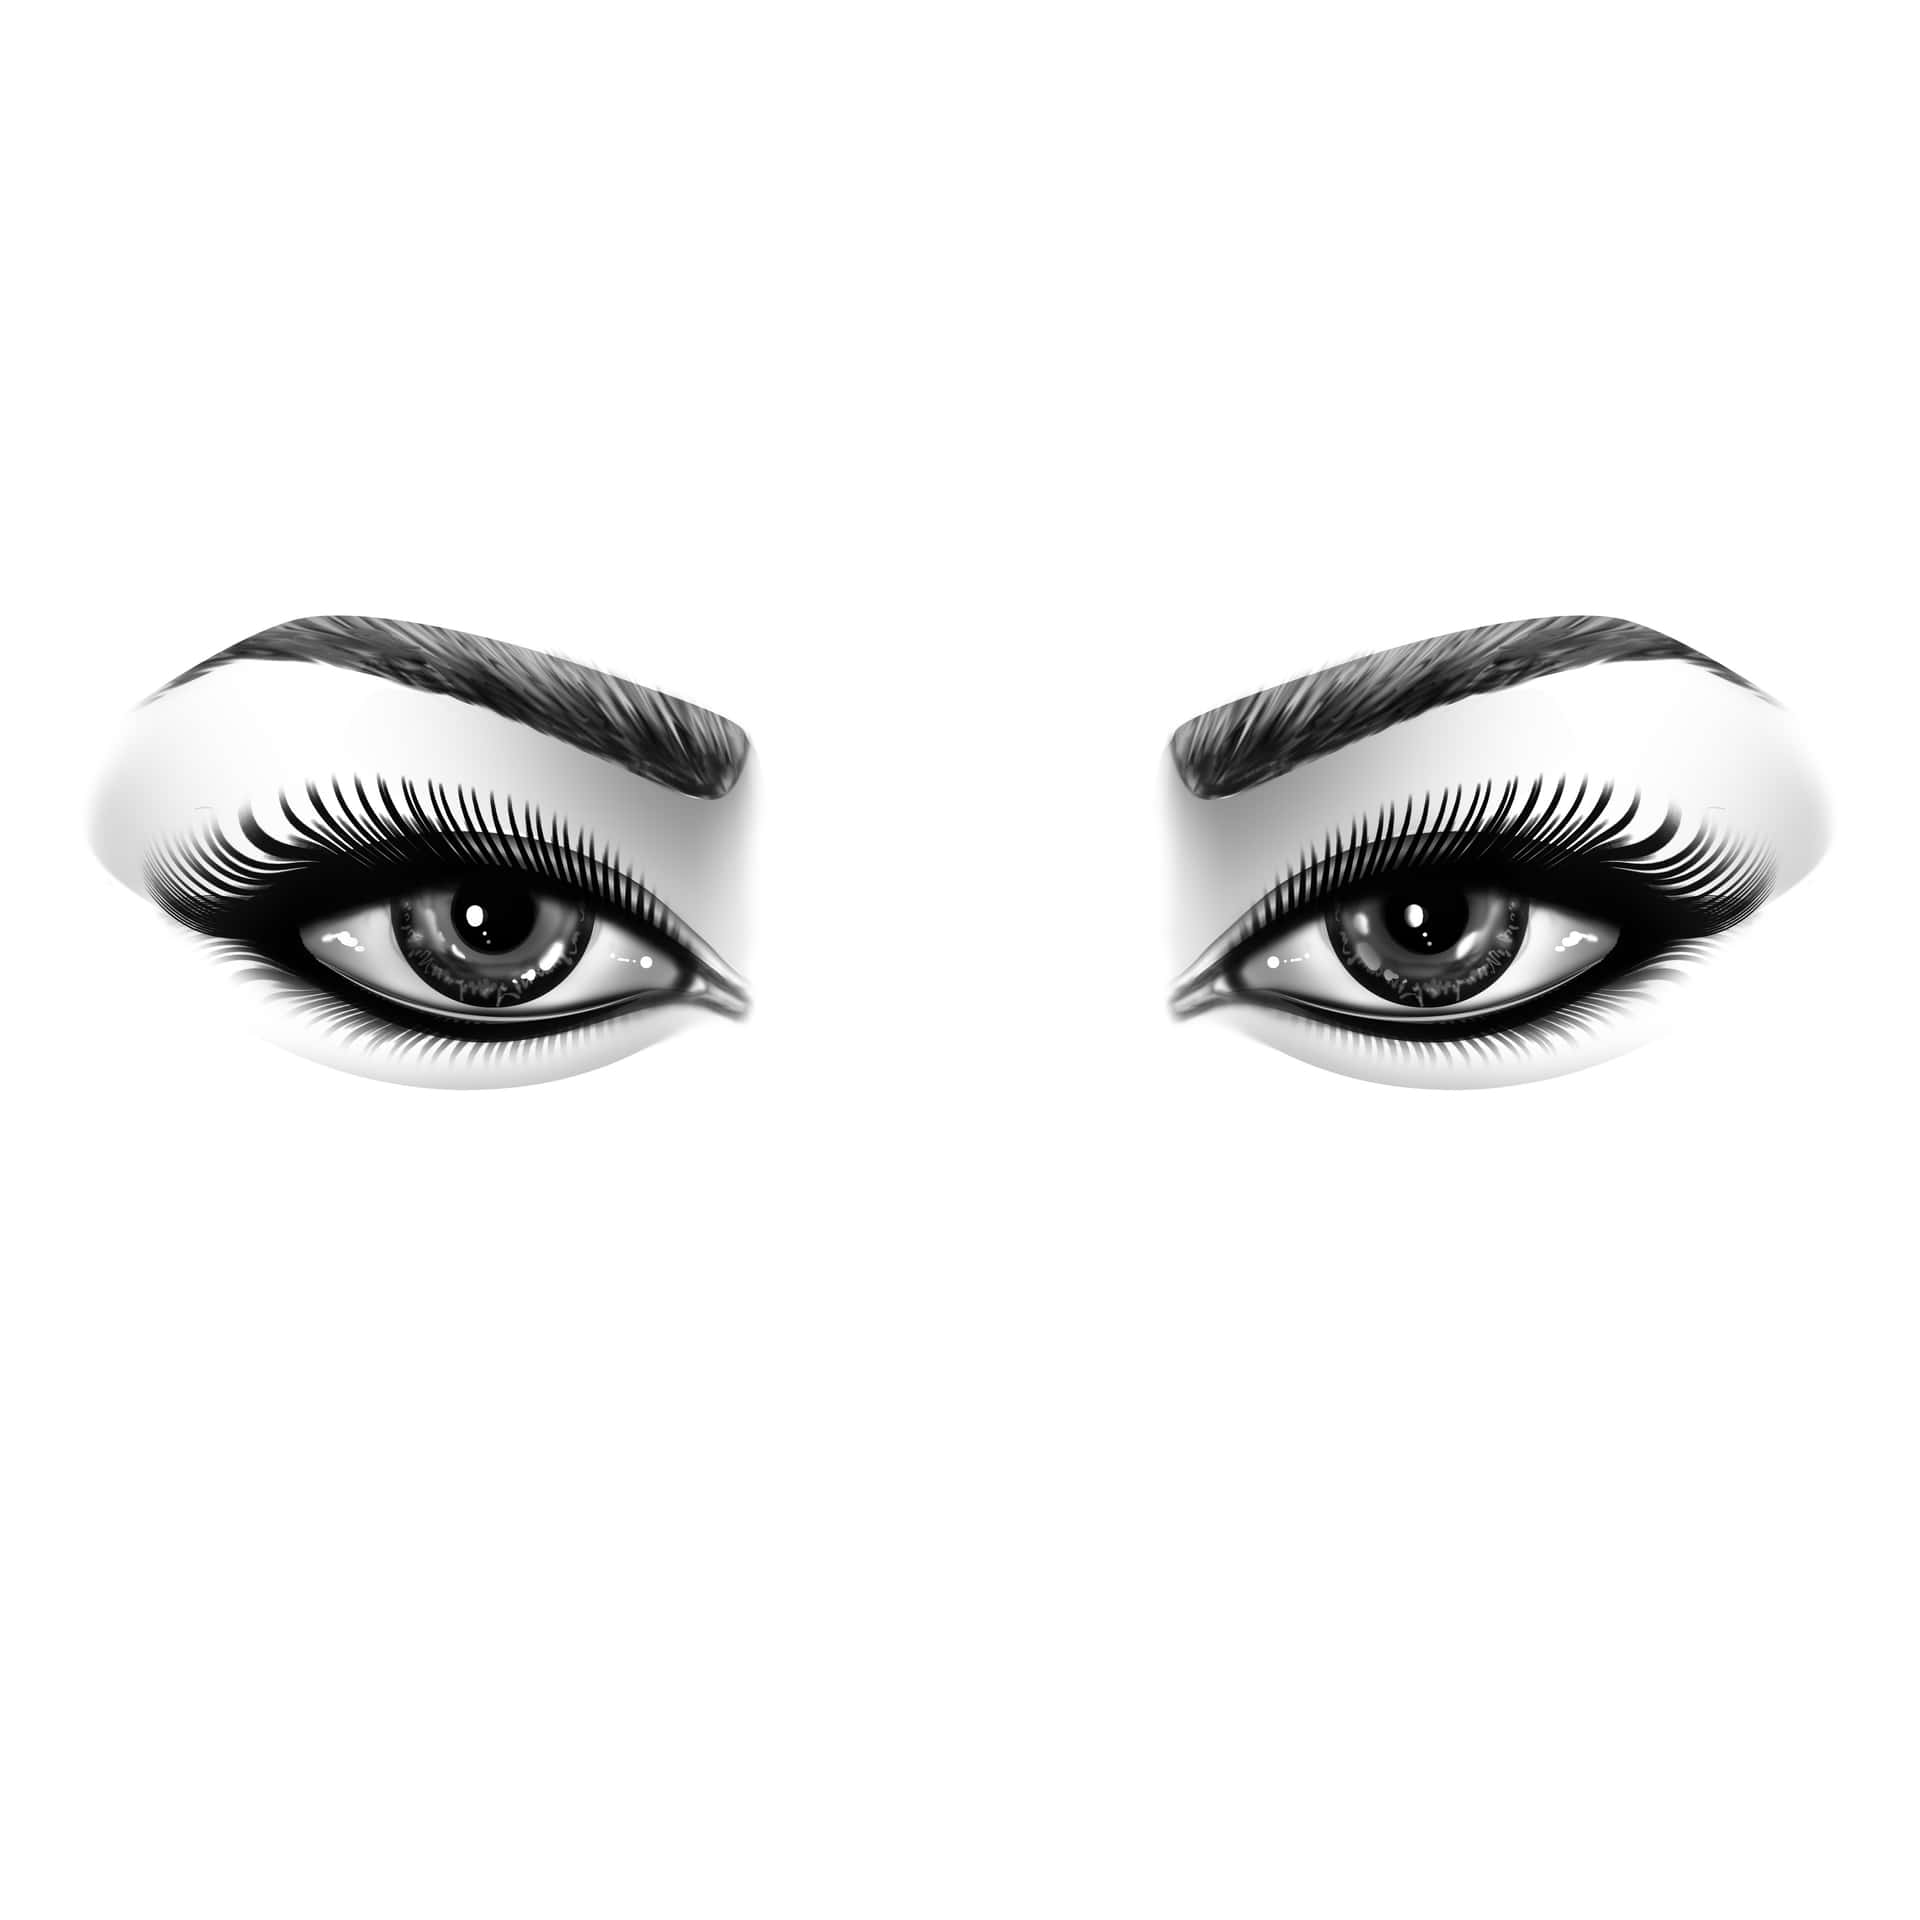 Two Eyes With Long Lashes On A White Background